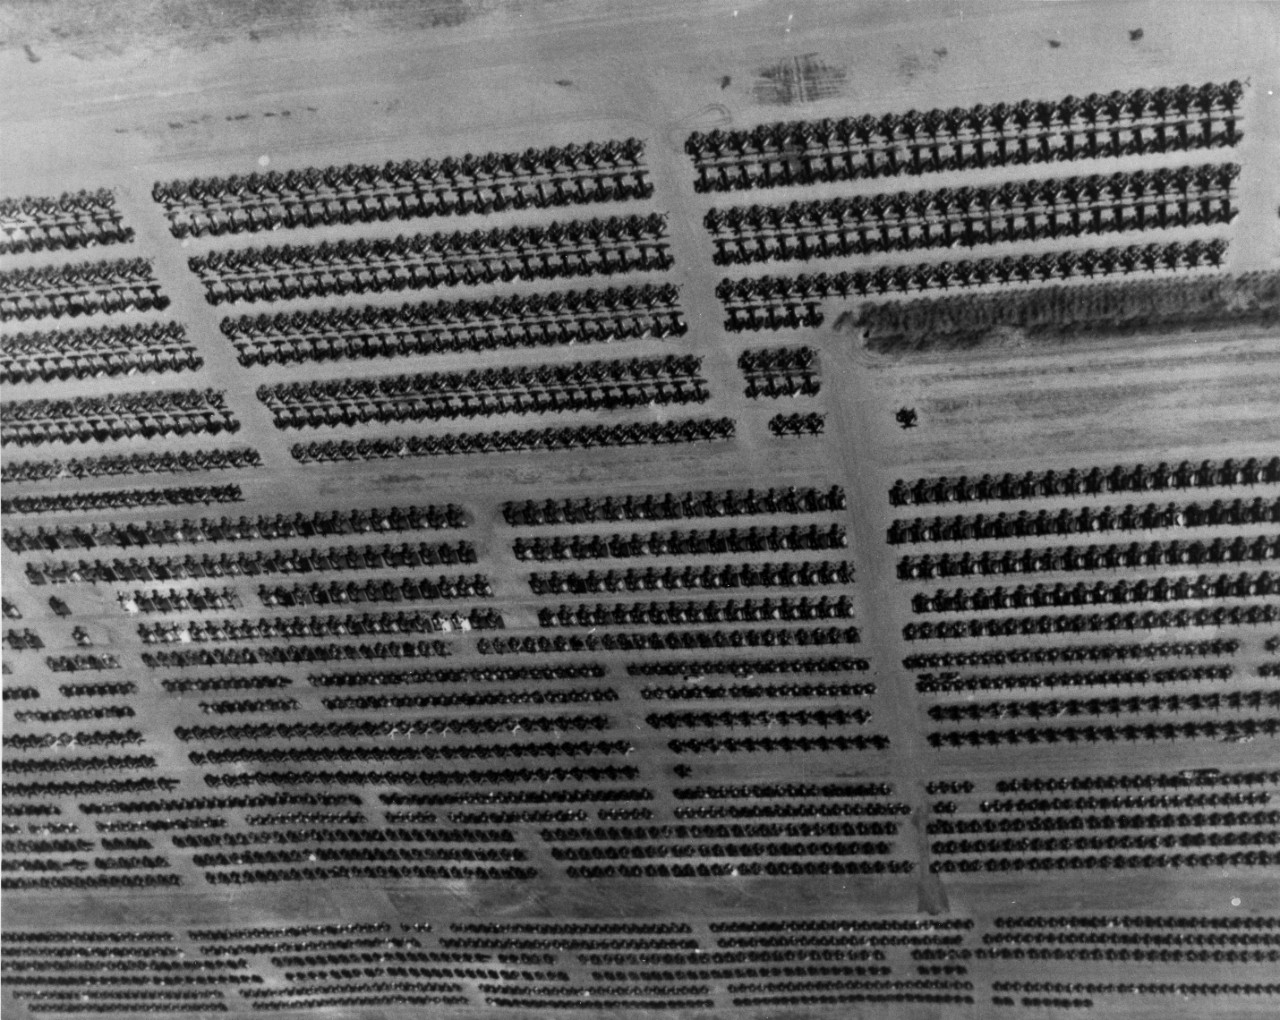 <p>S-495.10 Naval Air Station Clinton Photograph Collection</p><div style="left: -10000px; top: 0px; width: 9000px; height: 16px; overflow: hidden; position: absolute;"><div>&nbsp;</div></div>